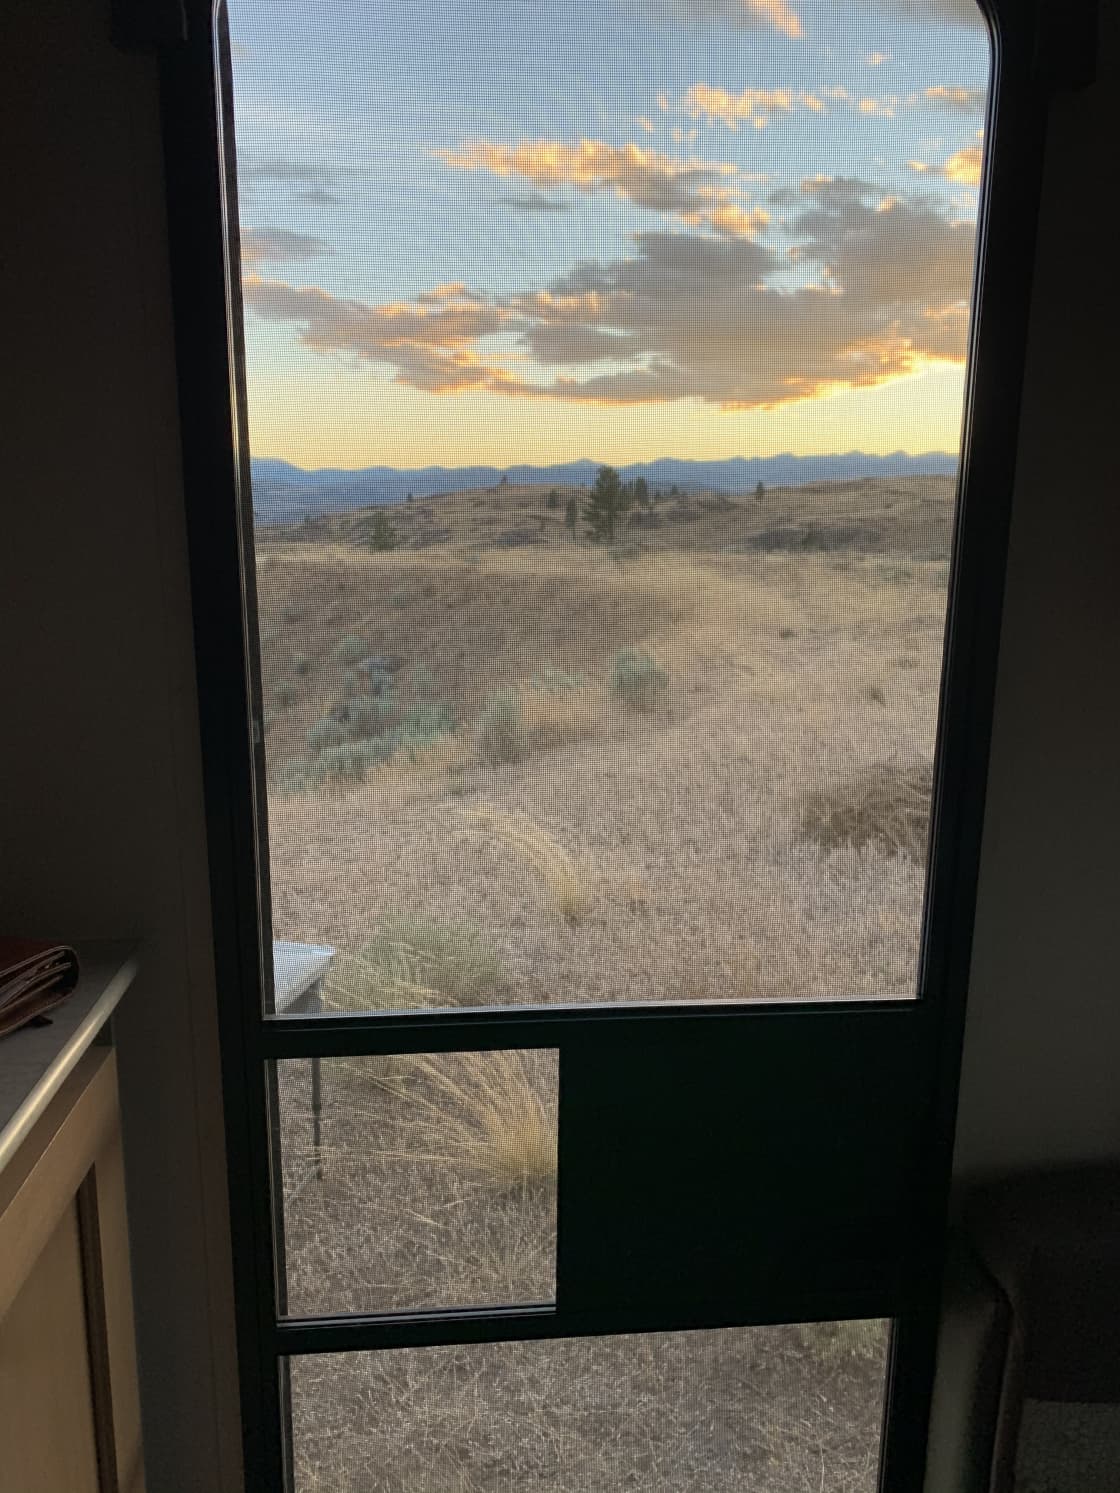 View from inside our trailer